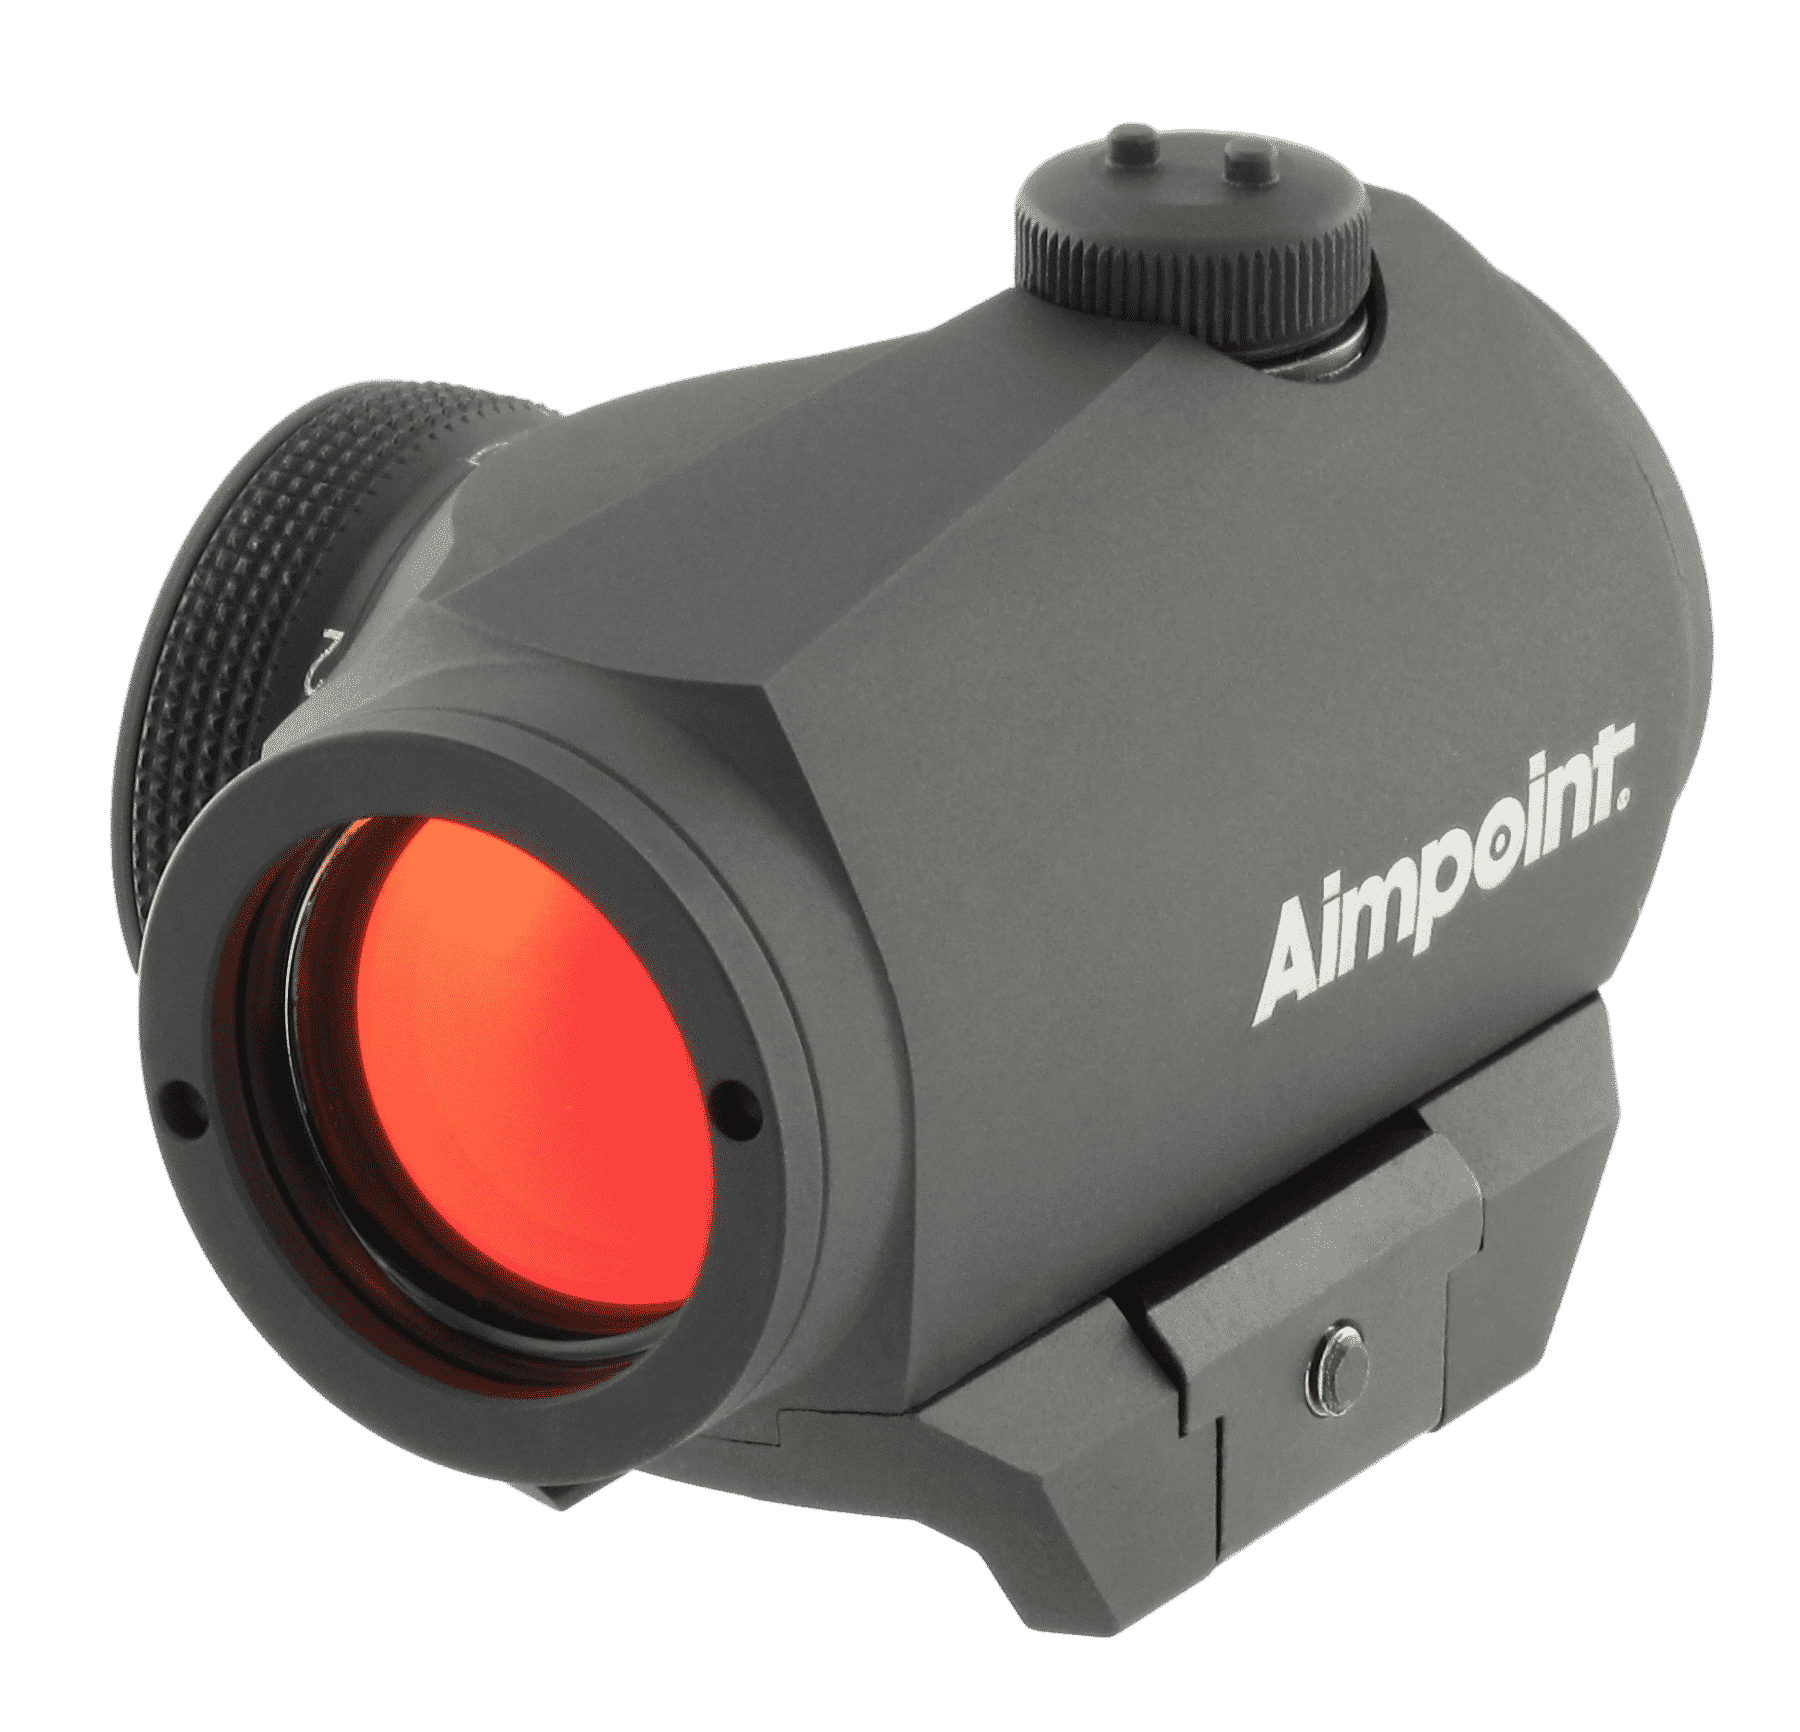 Aimpoint Return Policy